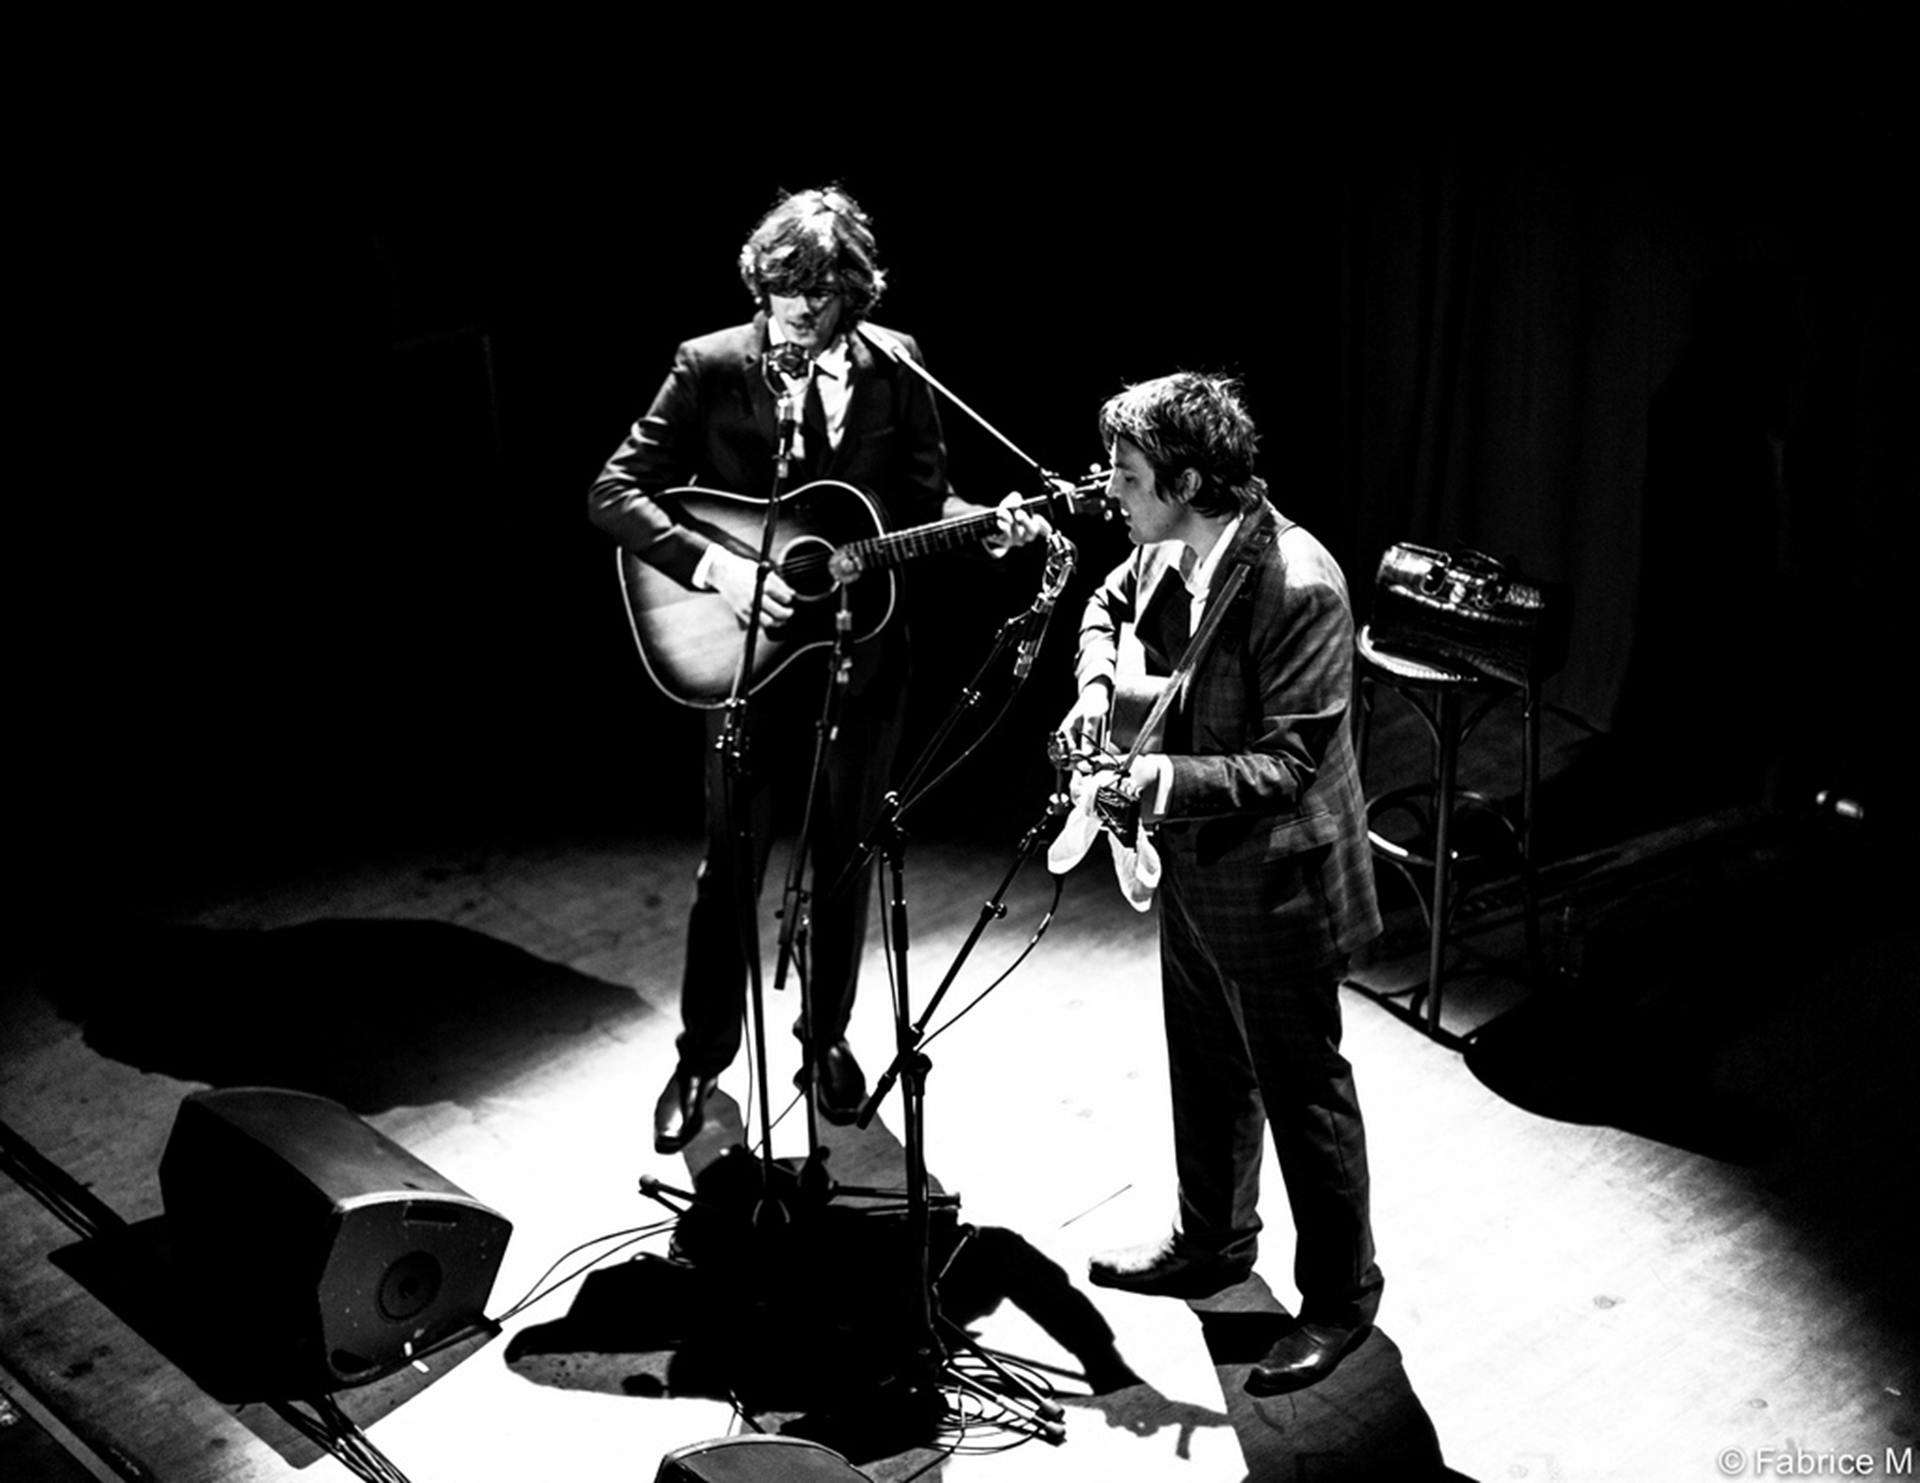 <p>The Milk Carton Kids' onstage repartee is an interesting blend of beautiful harmony with a dash of comedic banter thrown in. </p>
